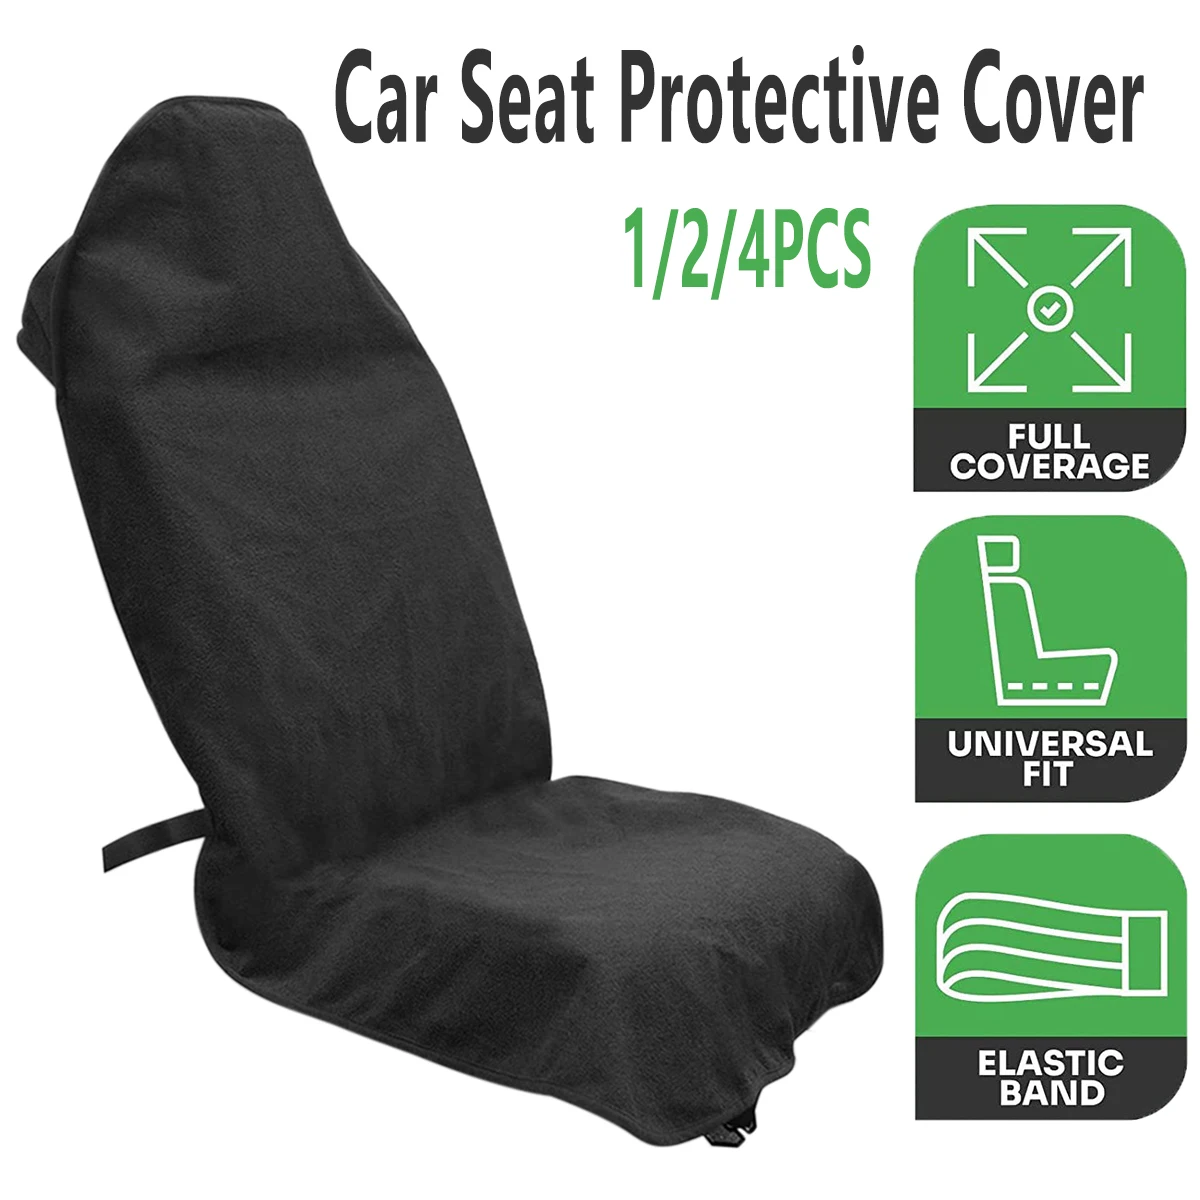 2/4PCS Car Seat Protective Cover Antifouling Car Seat Towel Protector with - $27.07+